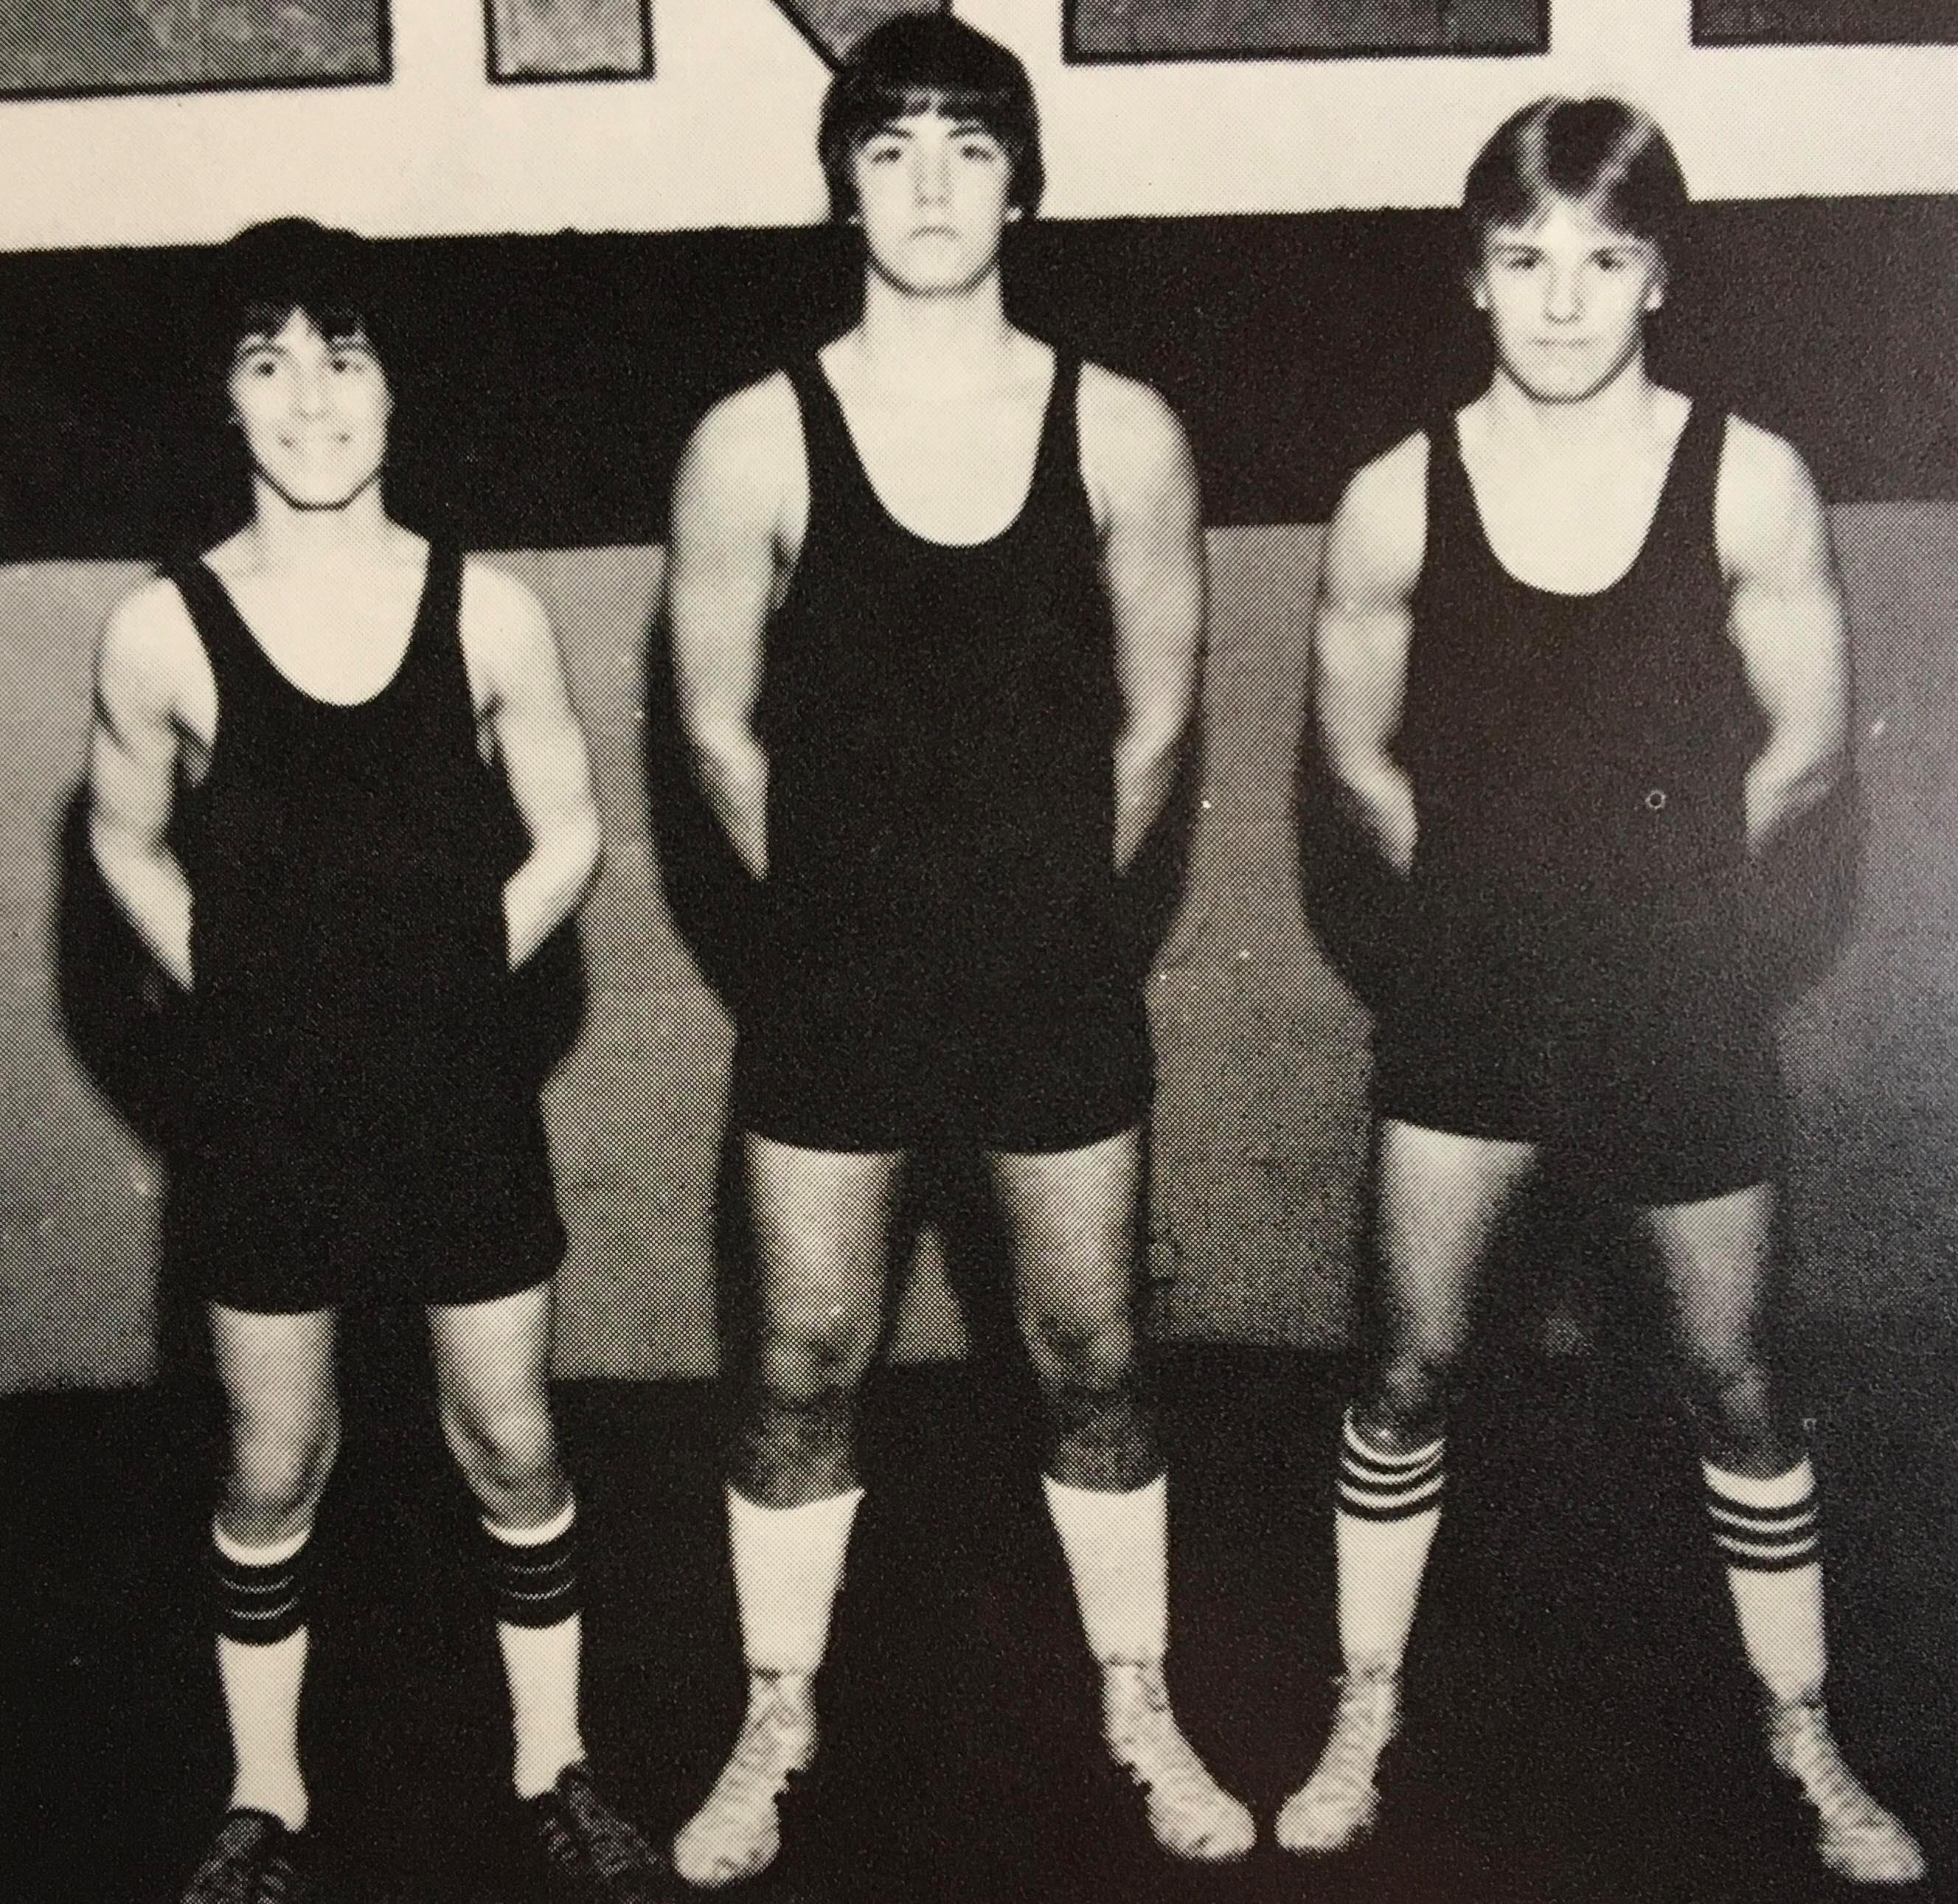 The young crop of Norse Wrestlers (L to R): Mike Blaeser, Todd Mickelson, and Chuck Wozney